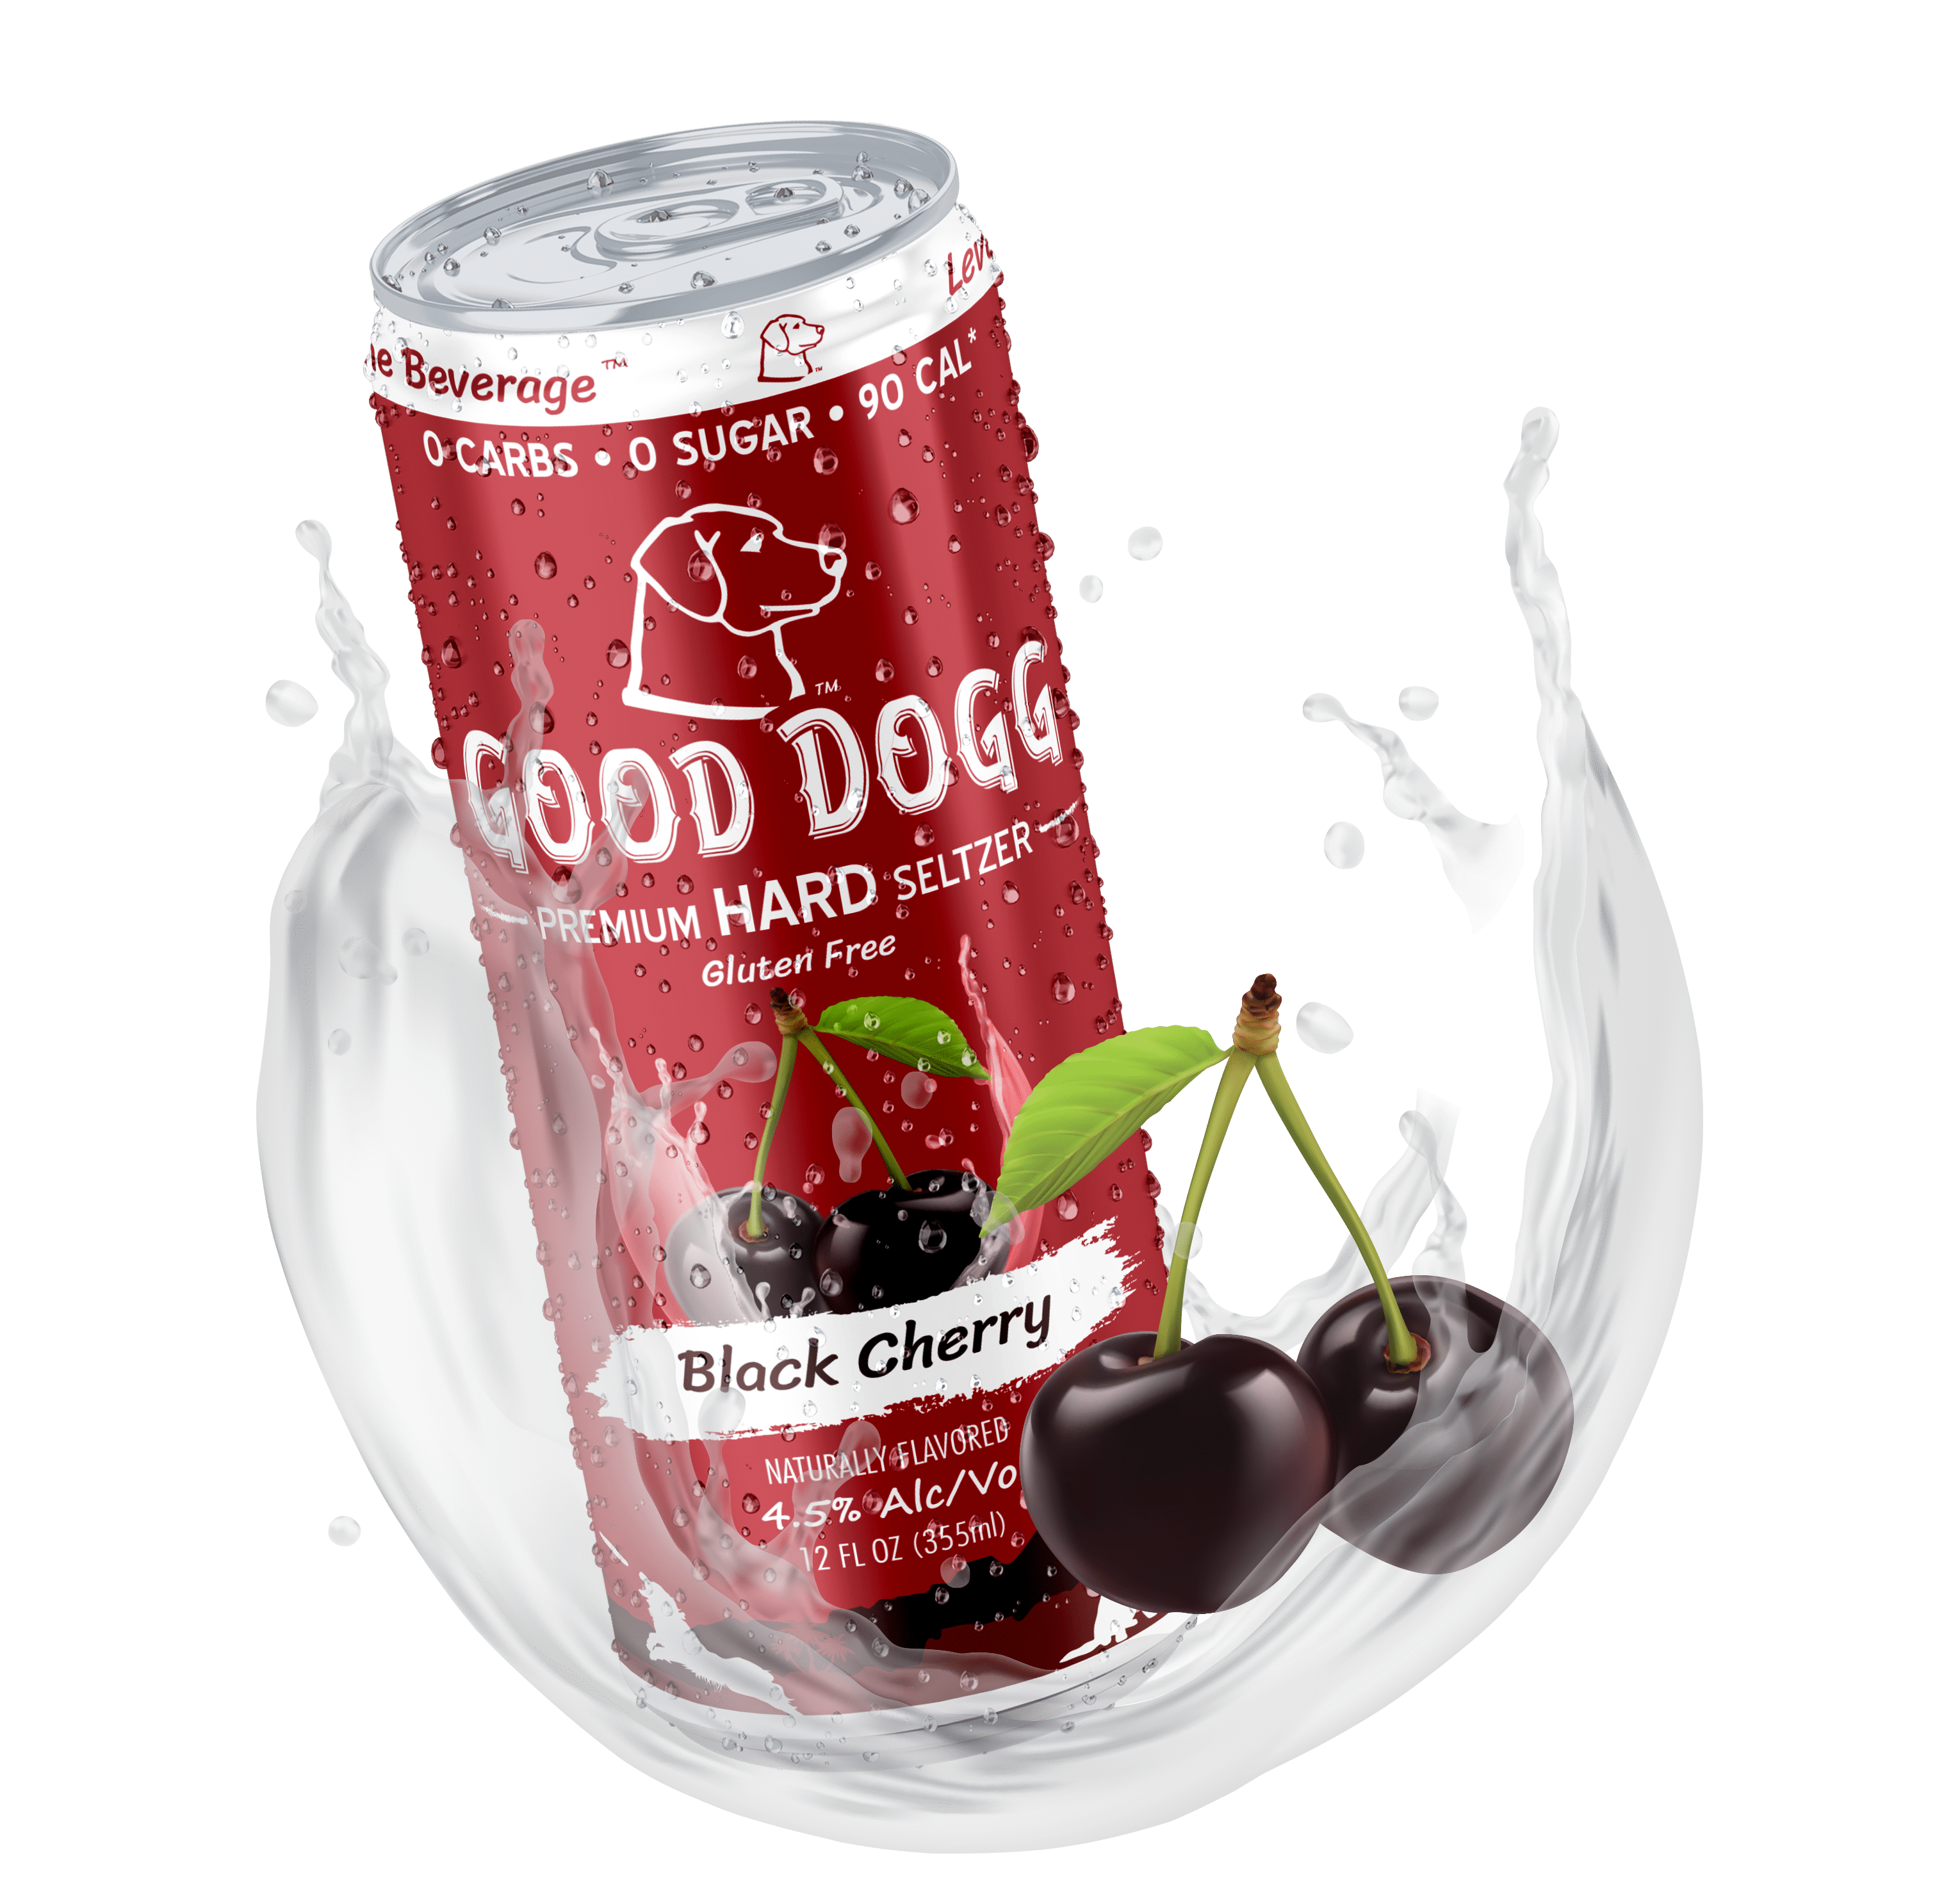 Black Cherry next to a can splashed with hard seltzer.